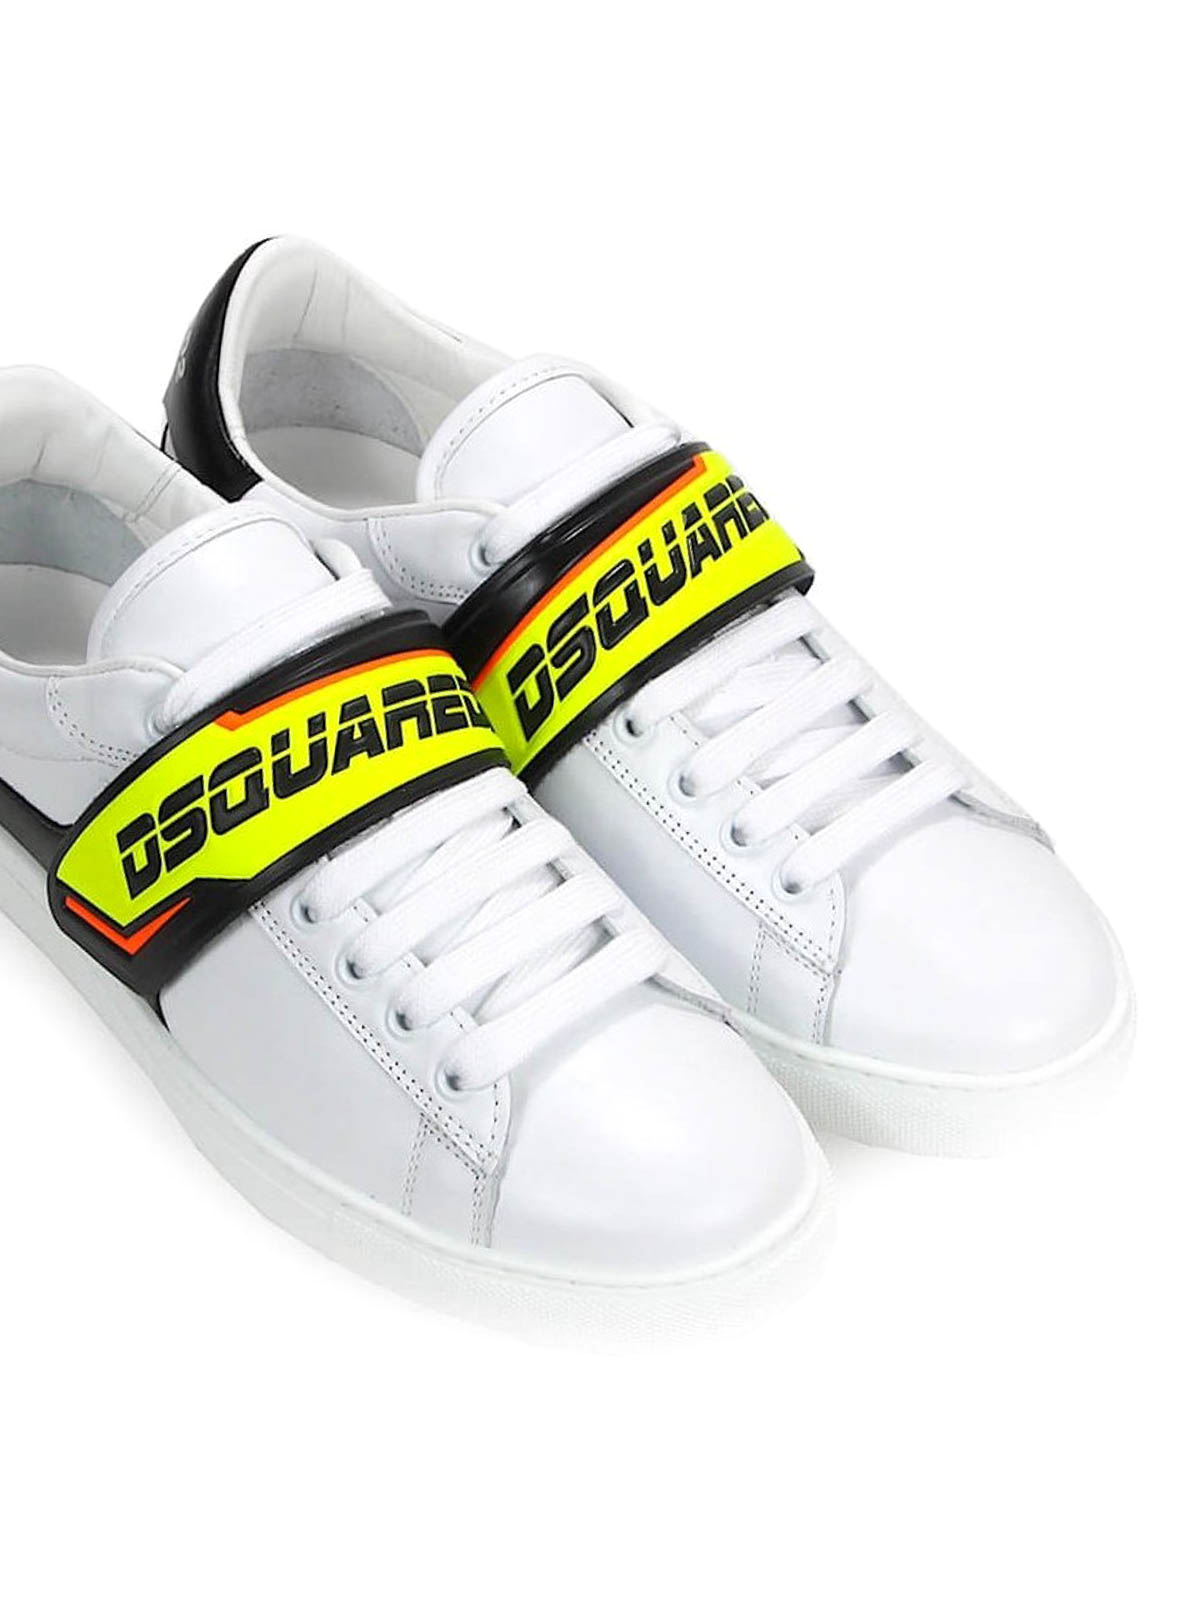 dsquared shoes new